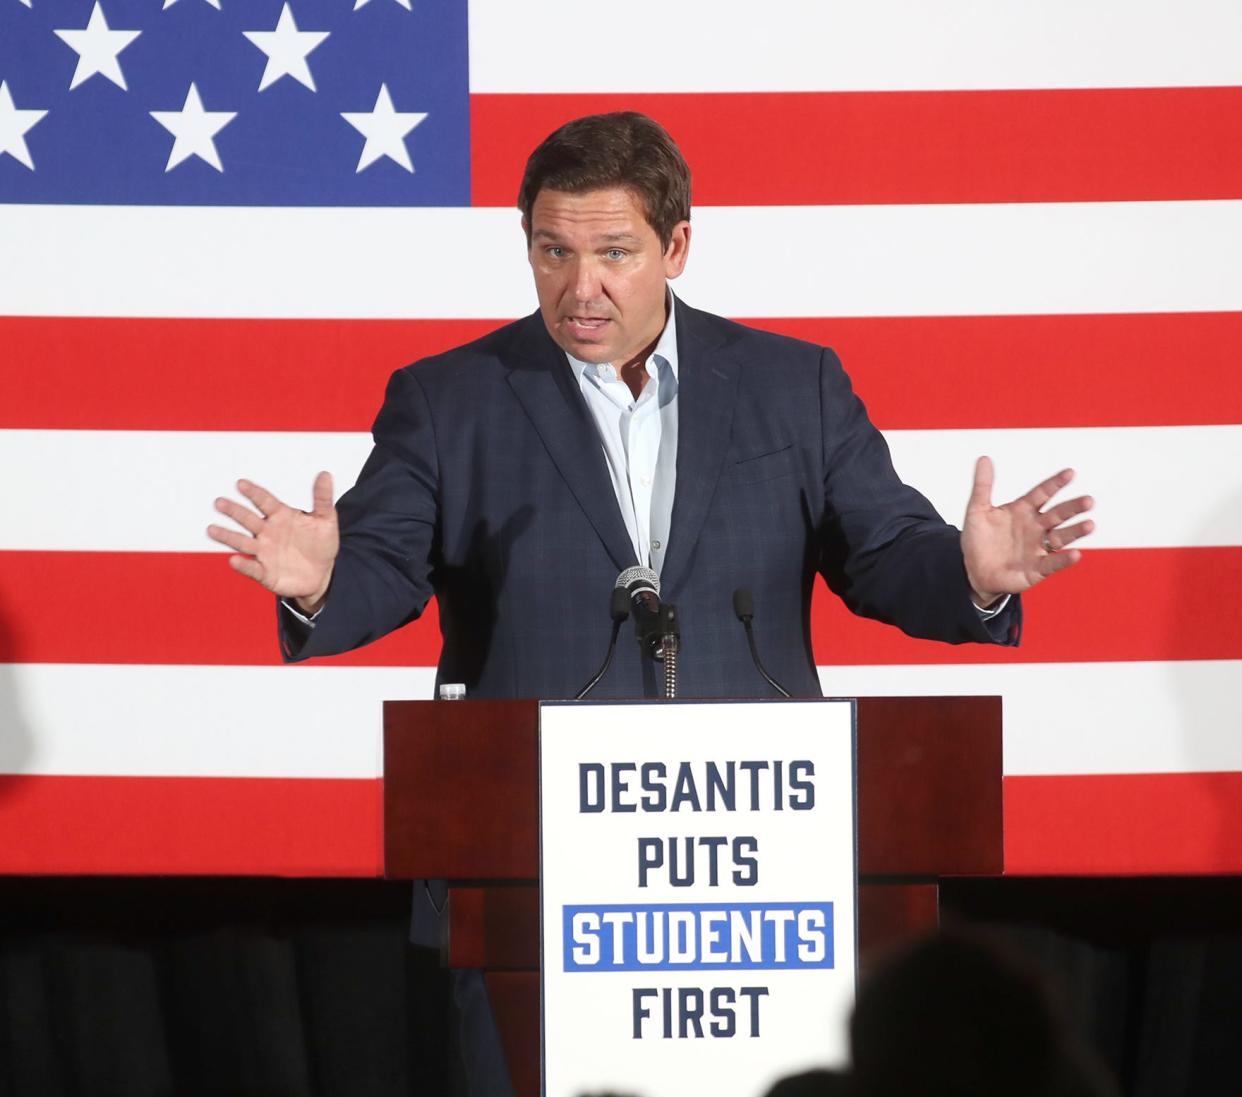 Florida Gov. Ron DeSantis speaks to a crowd of supporters during an October 2022 event held at the Sahib Shriner Event Center in Sarasota as part of his Education Agenda Tour.